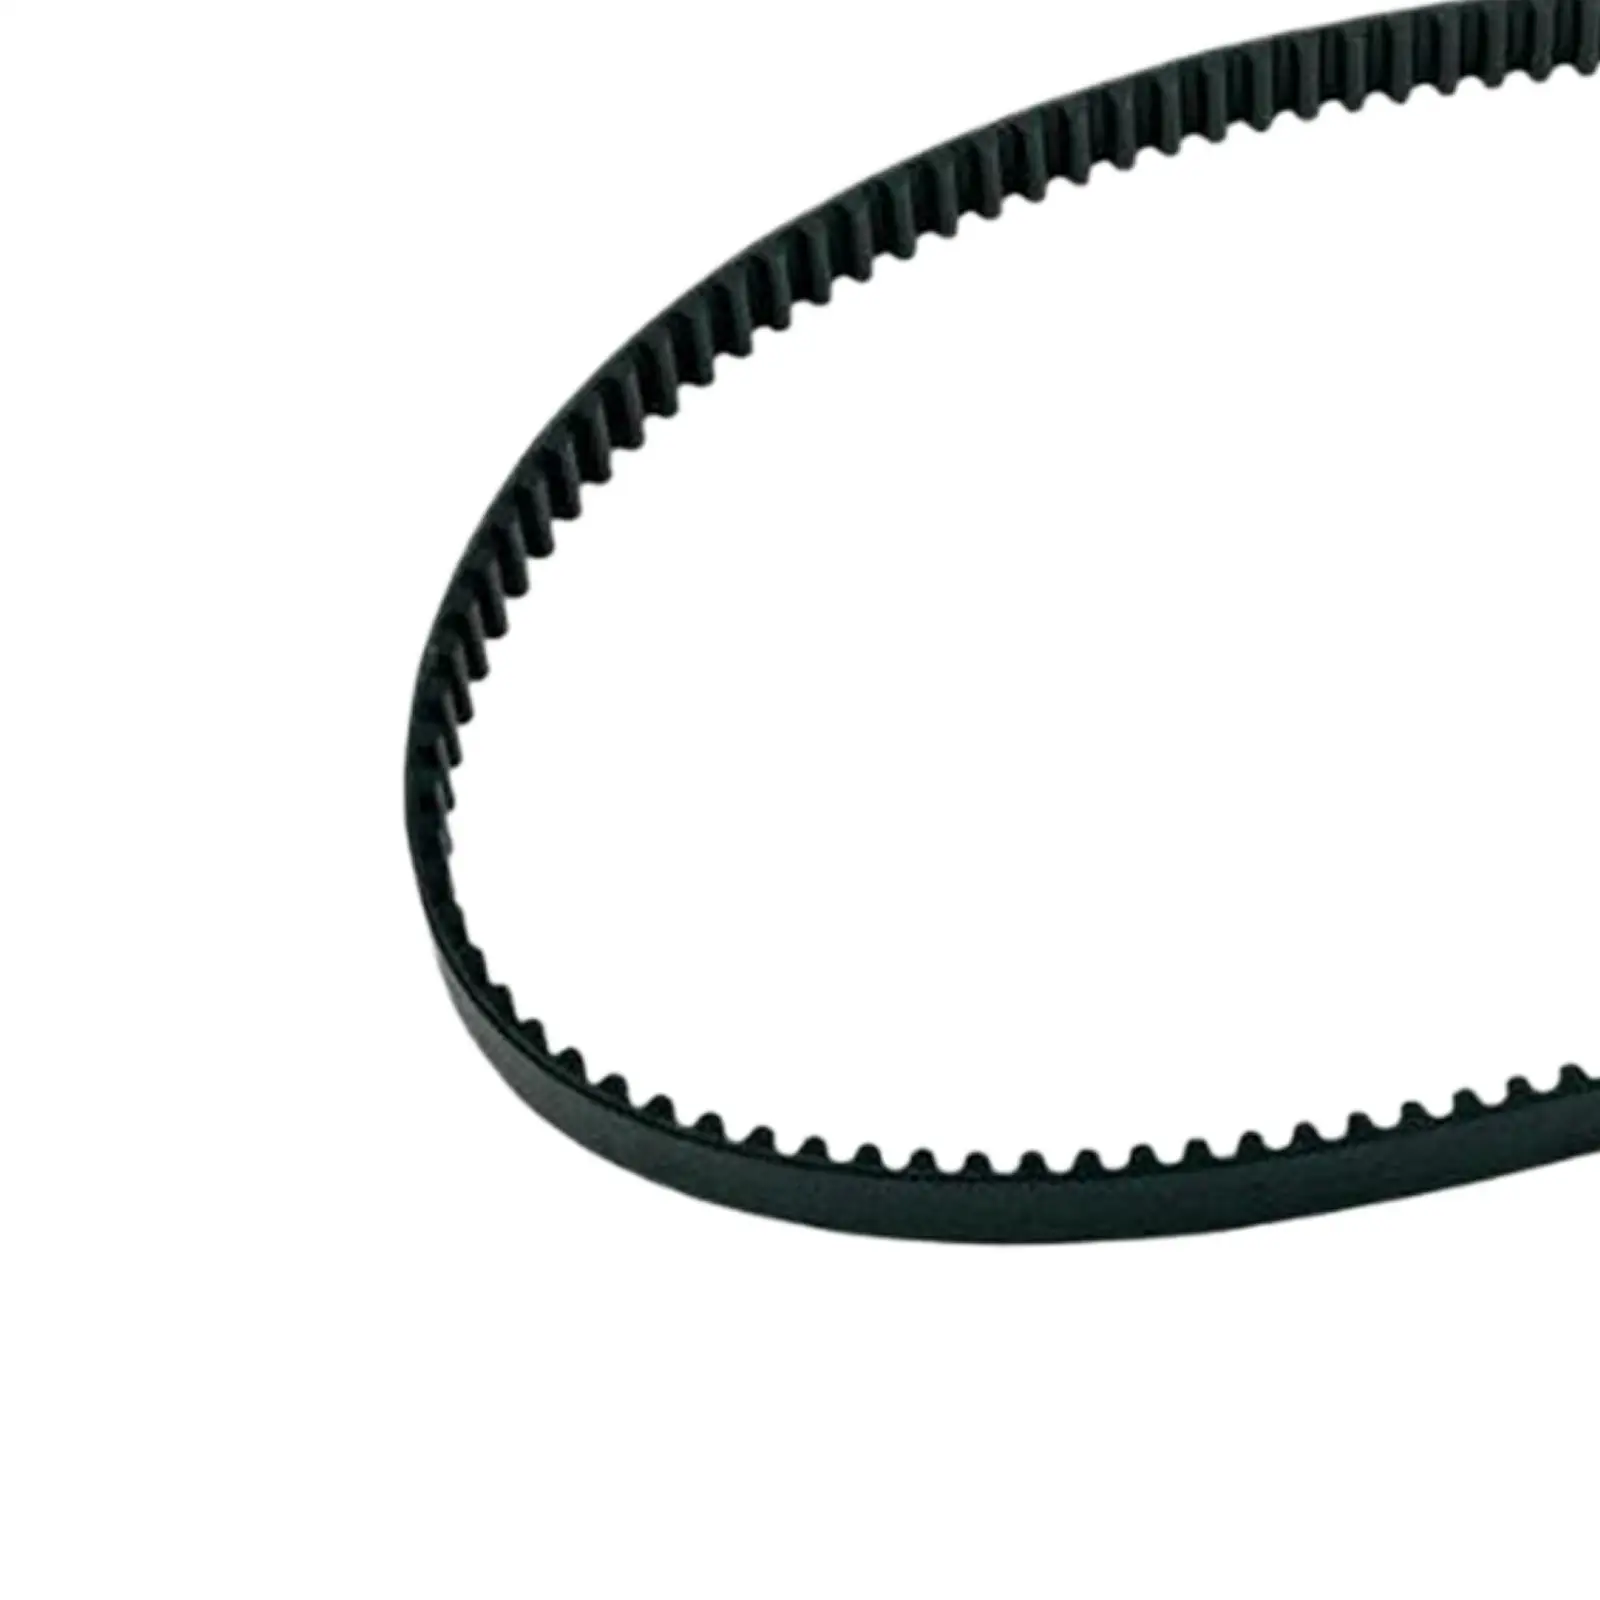 

Rear Drive Belt 1inch 130T Bdlspcb-130-1 High Quality Easy Installation Replace Rubber Motorcycle Accessories